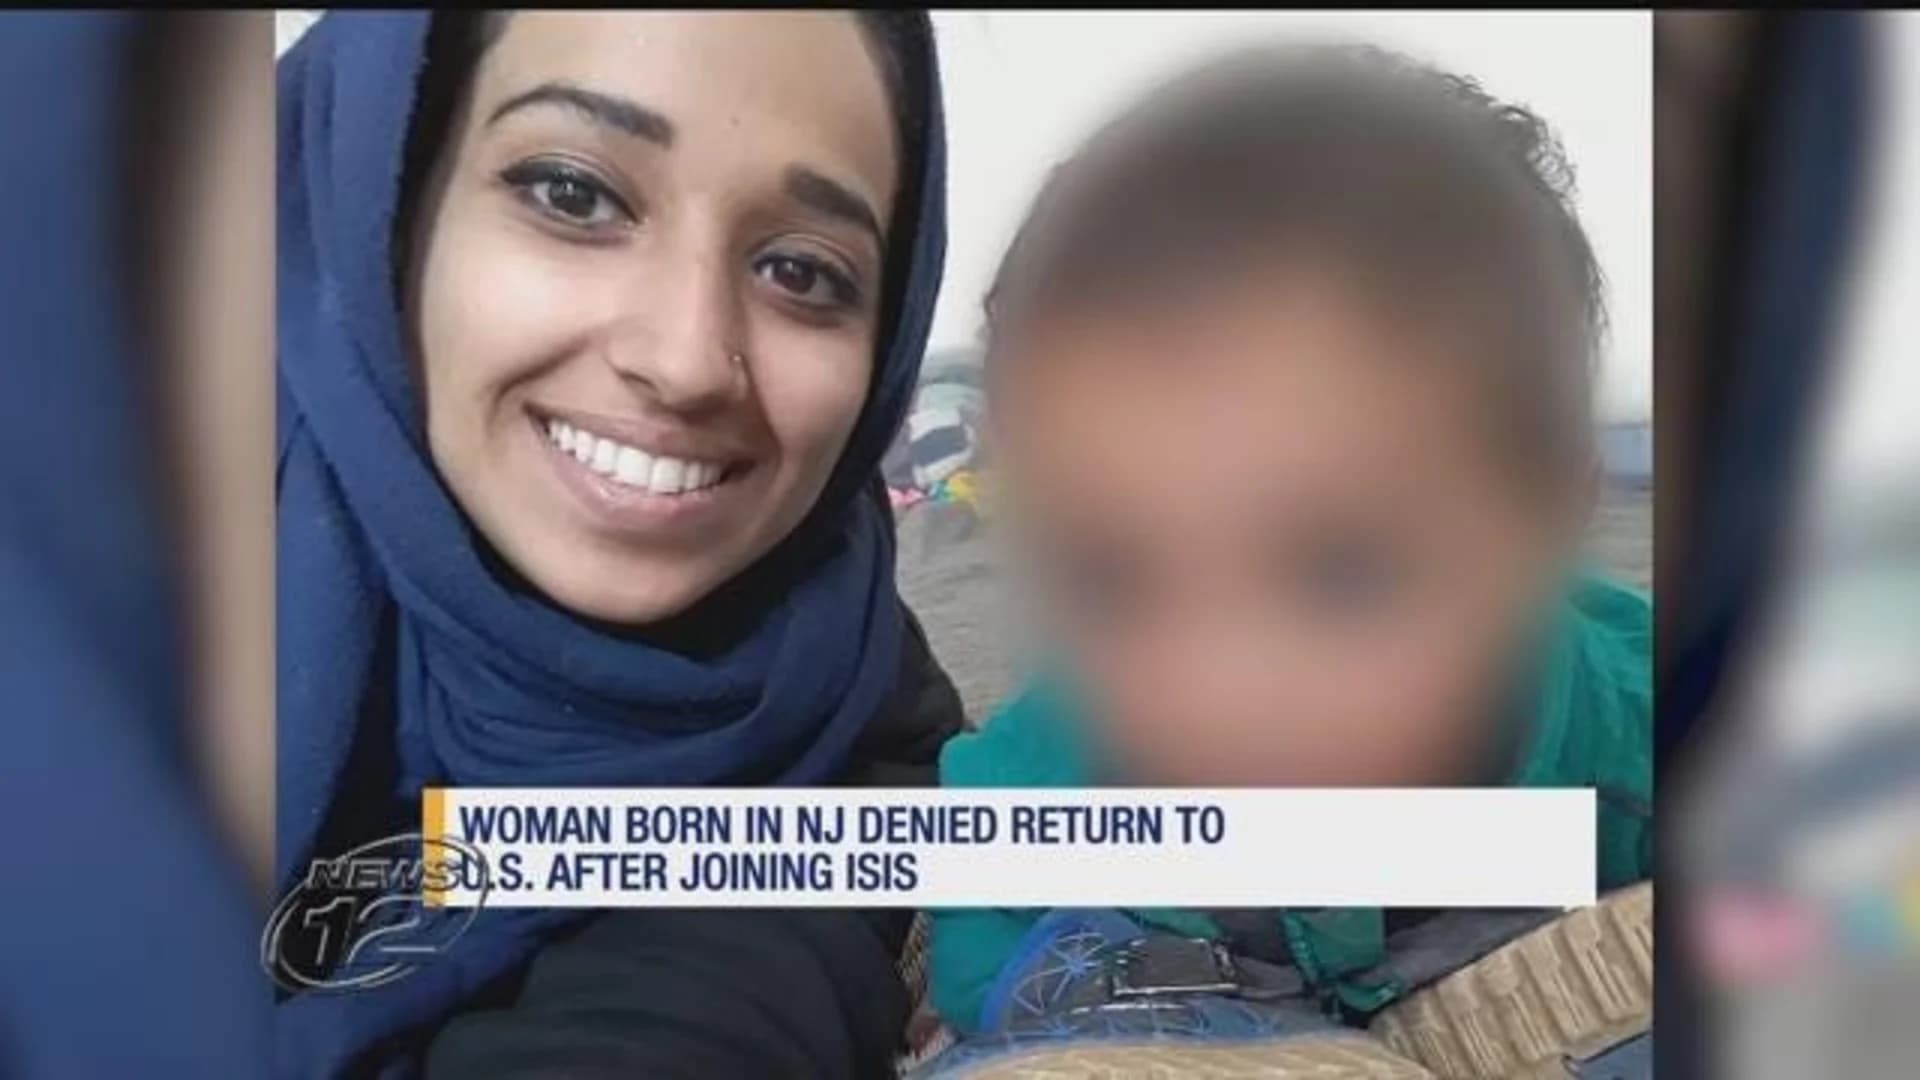 Trump says no US return for NJ-born woman who joined Islamic State group